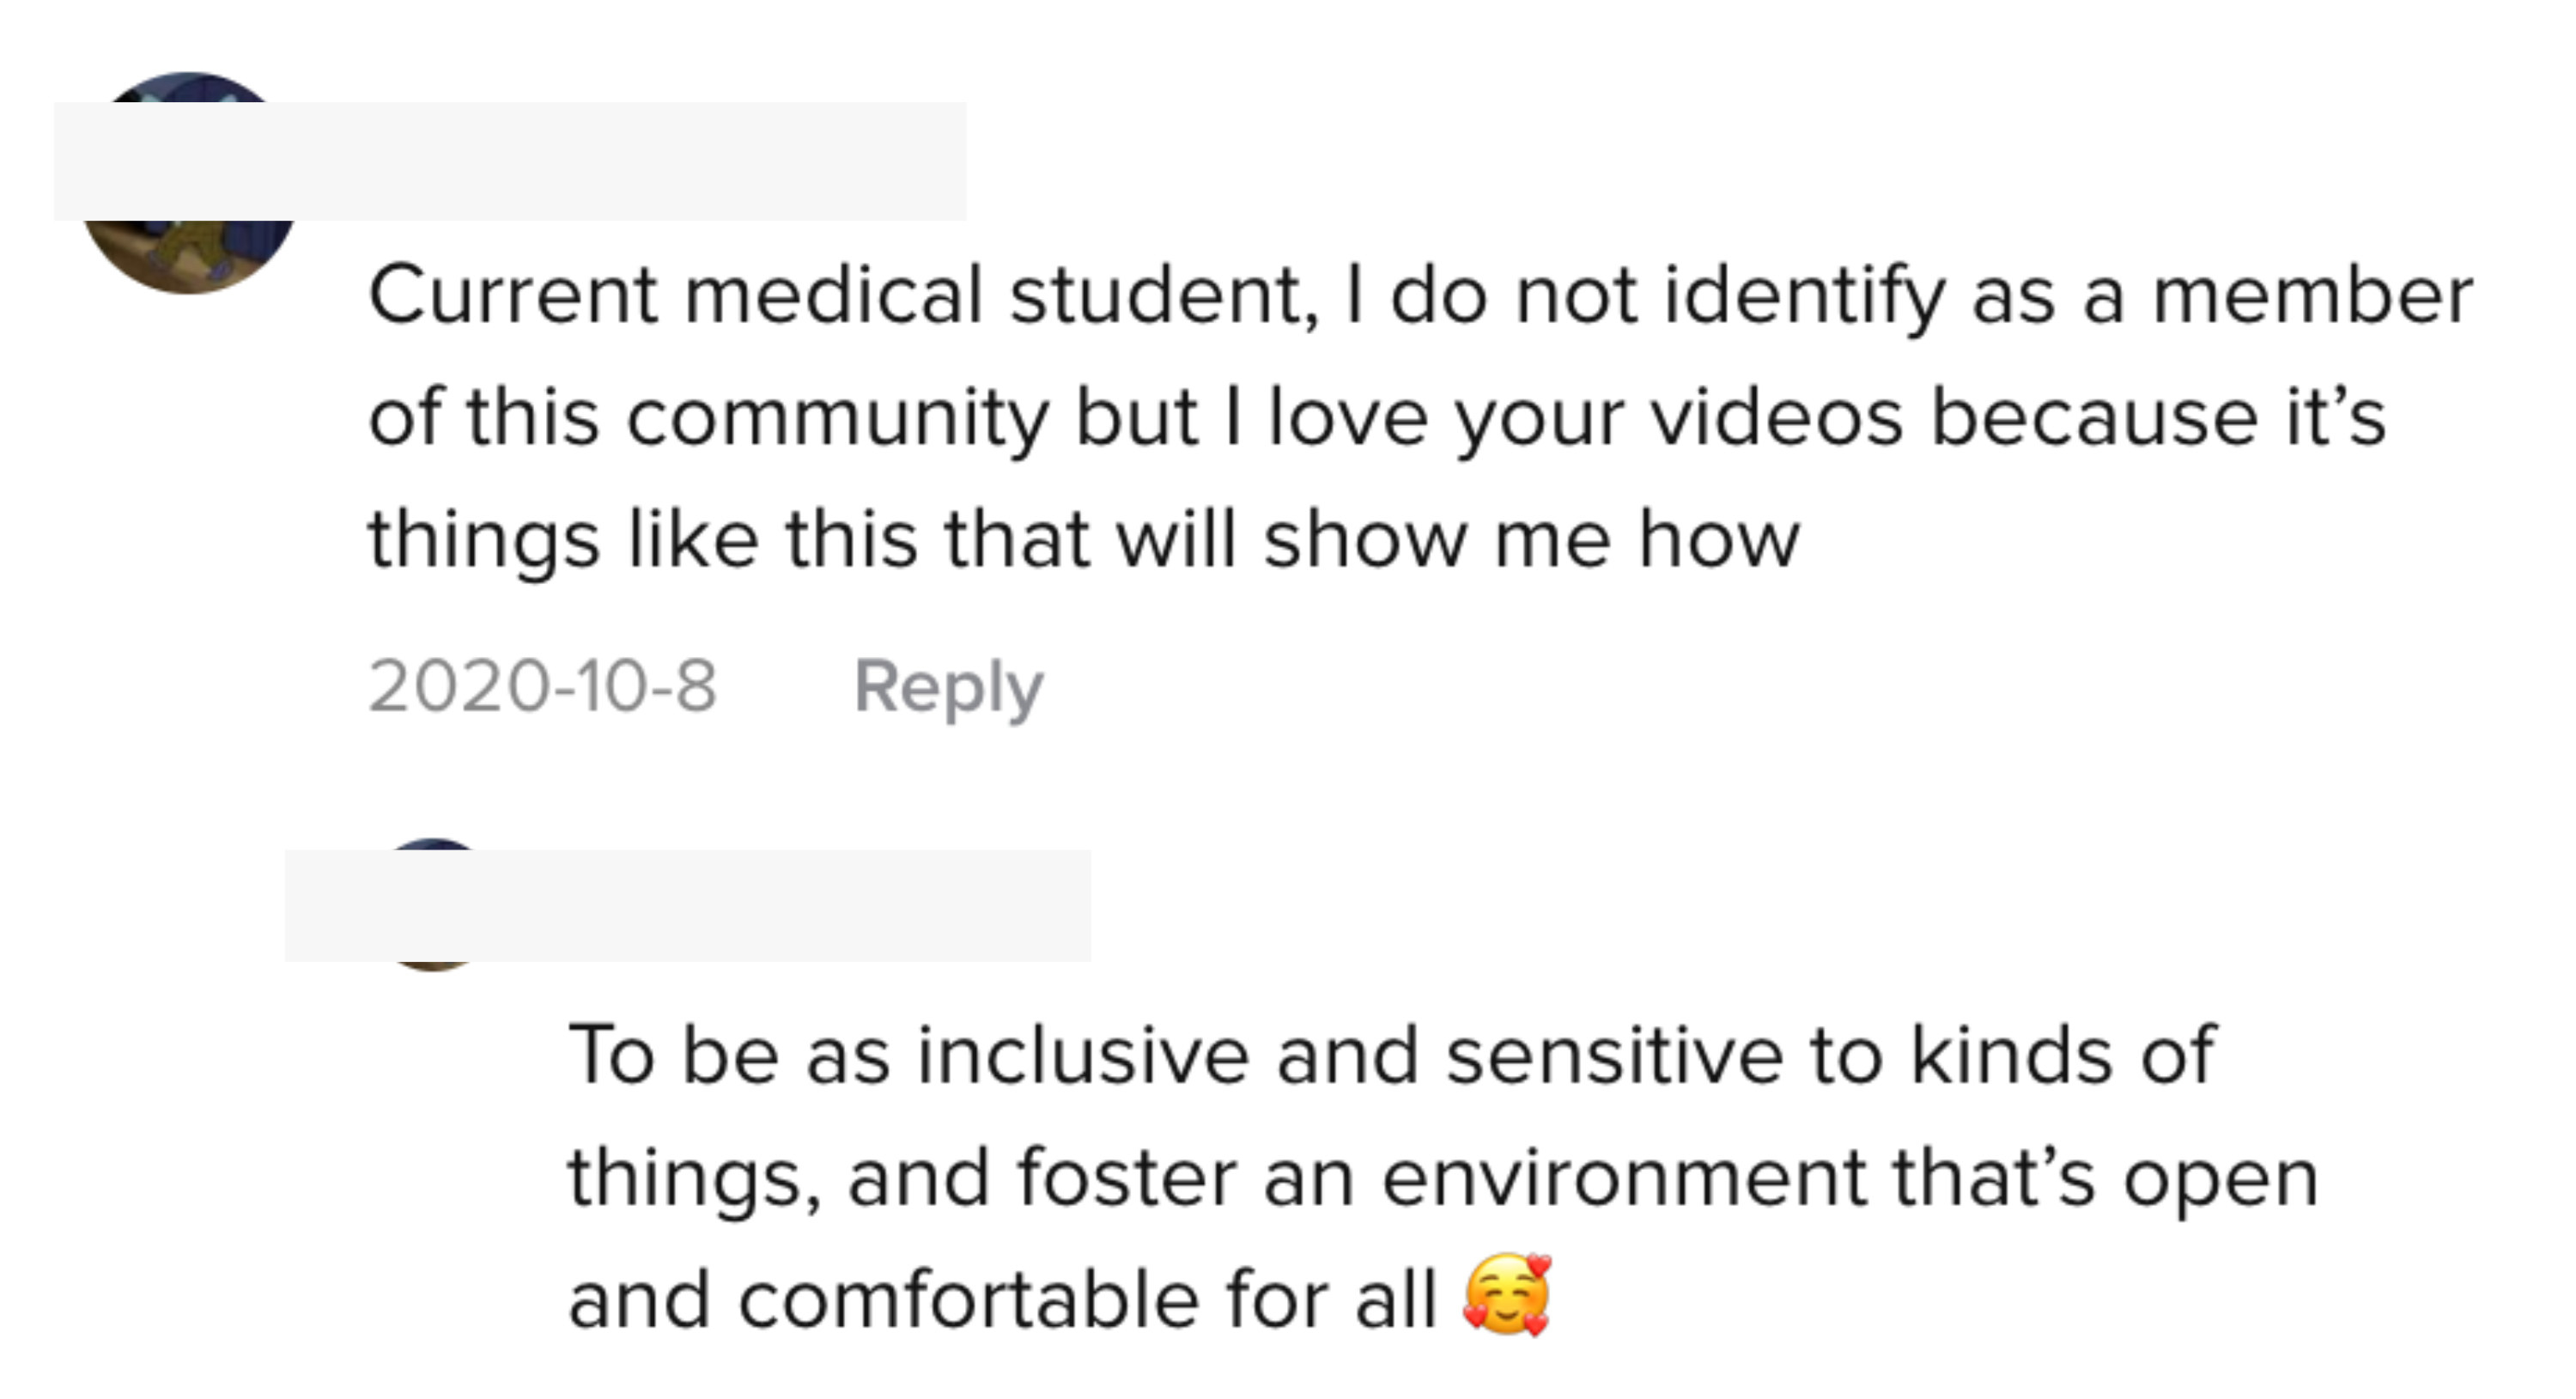 One TikTok user said they&#x27;re a medical student who doesn&#x27;t identify as part of the LGBTQ community but loves the videos because it shows them how to be more inclusive